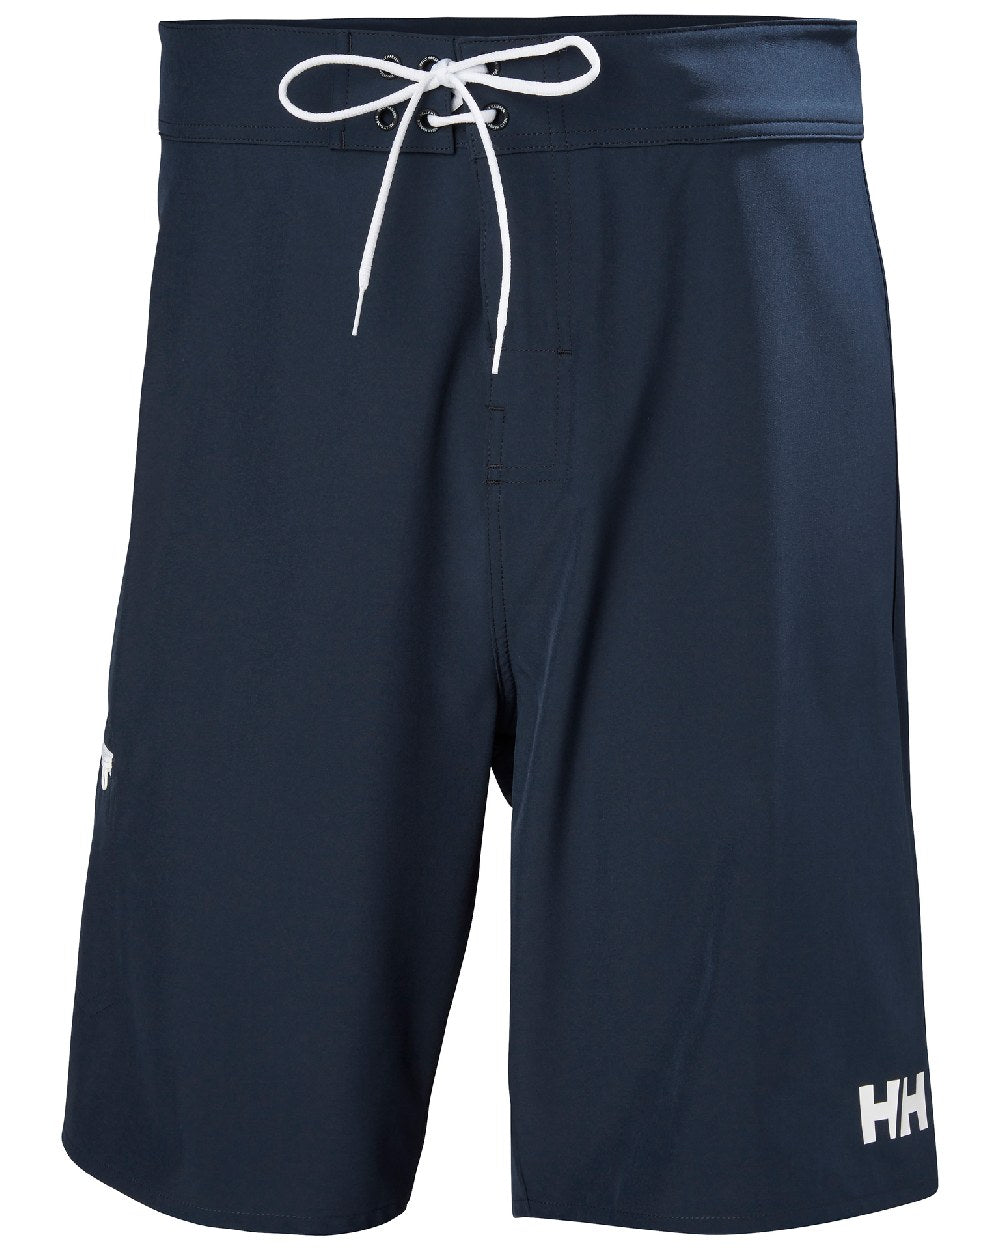 Navy Coloured Helly Hansen Mens HP 9 inch Board Shorts 3.0 on white background 